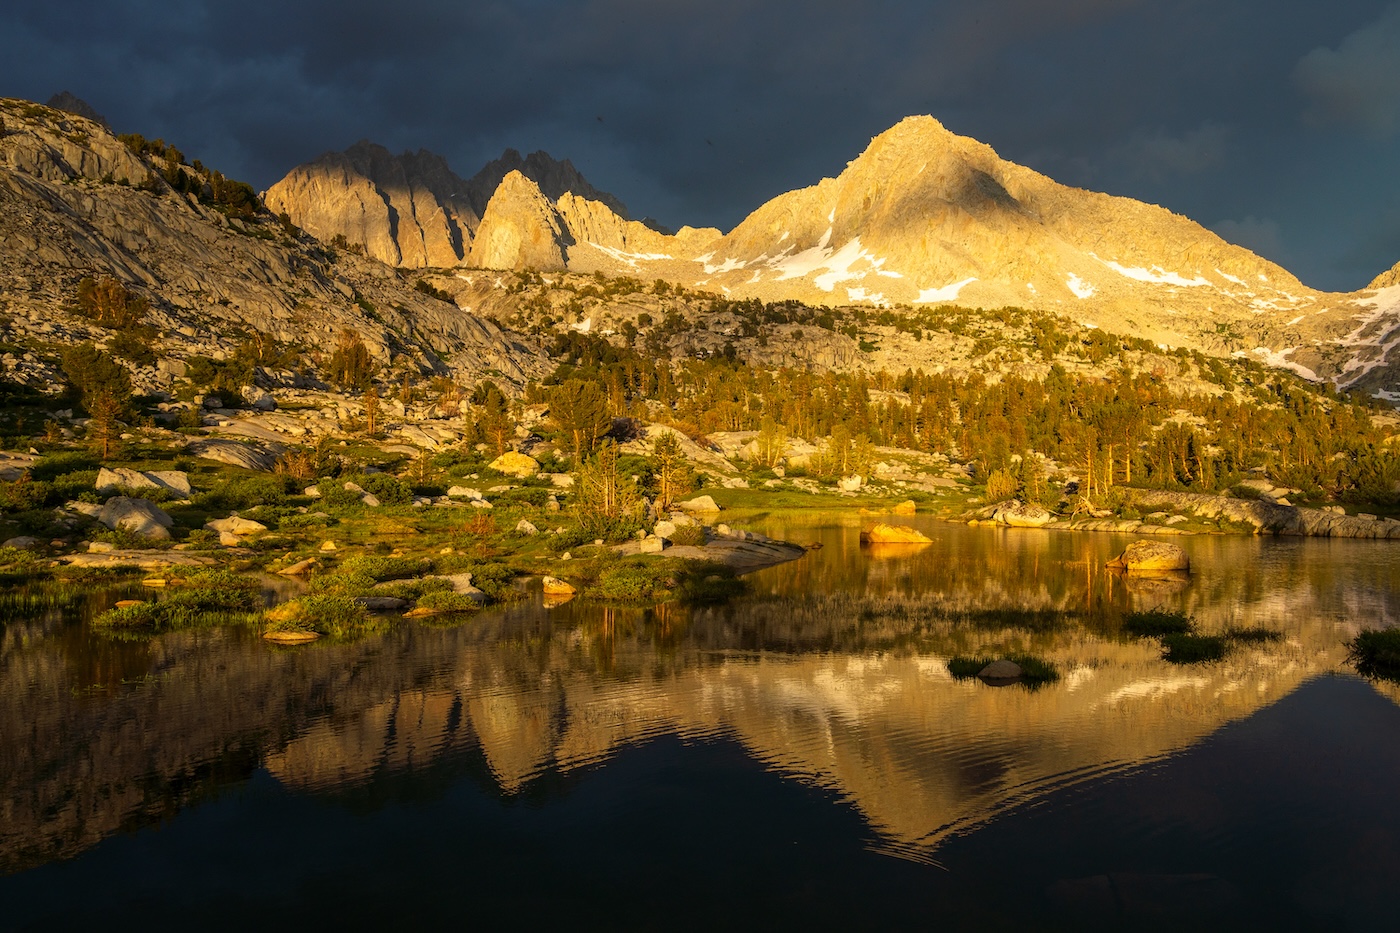 Golden hour at Dusy Basin in Kings Canyon National Park. Photos by Brock Dallman